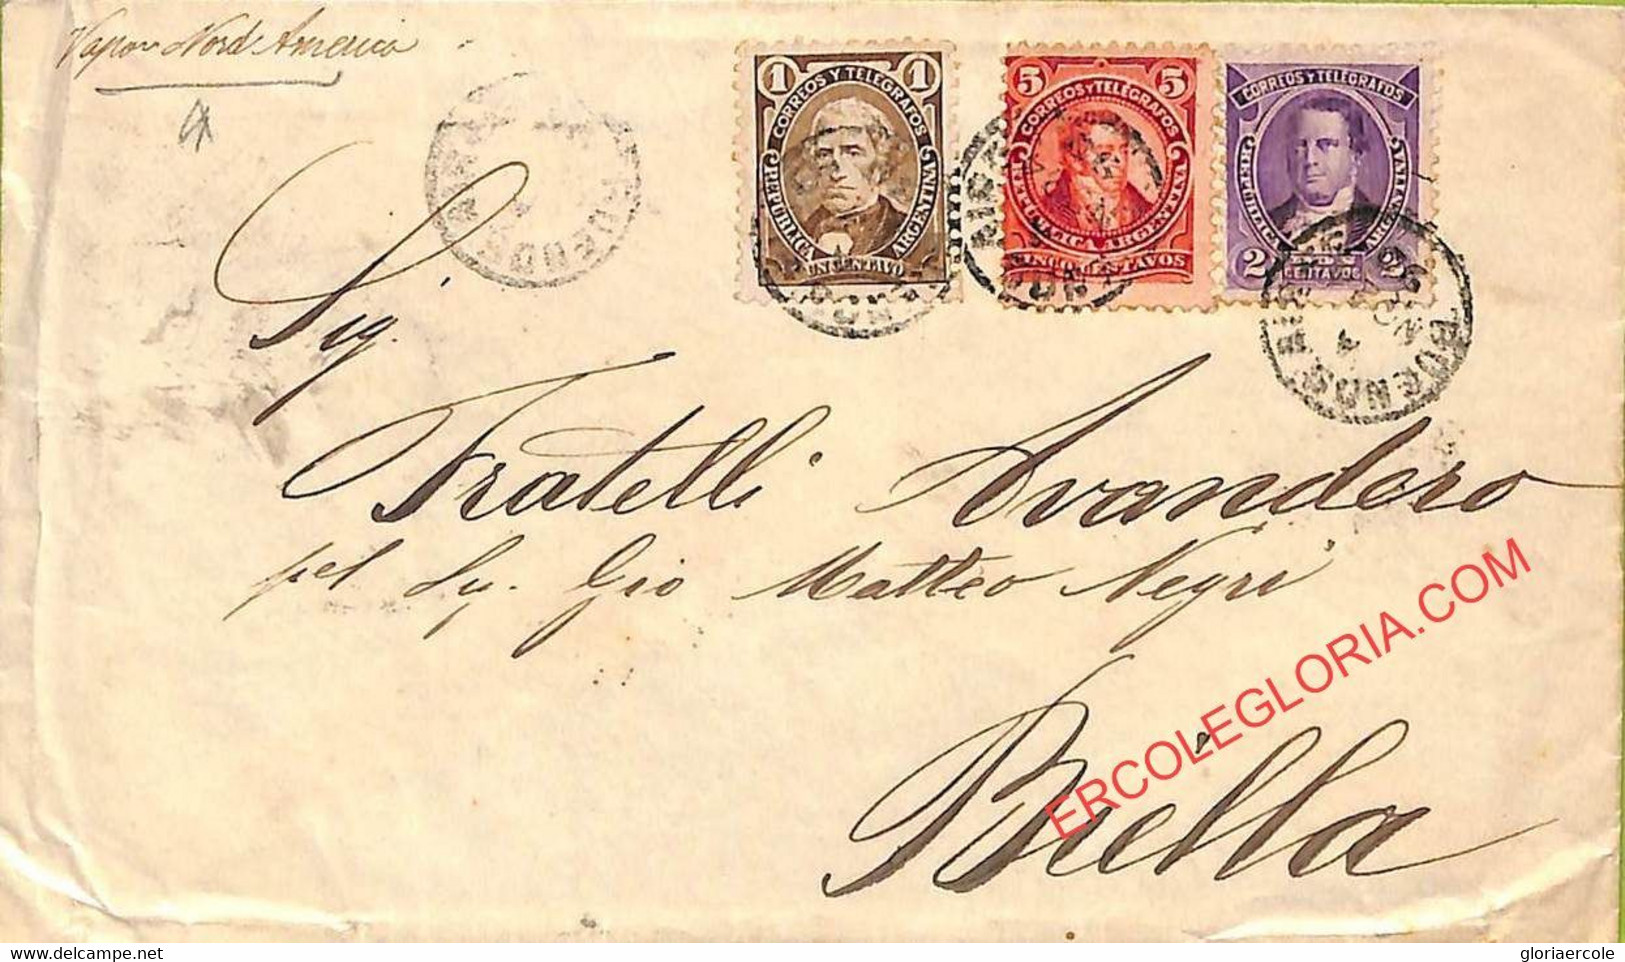 Ad6082 - ARGENTINA - POSTAL HISTORY - 3 Colour Franking COVER To ARGENTINA 1890 - Storia Postale